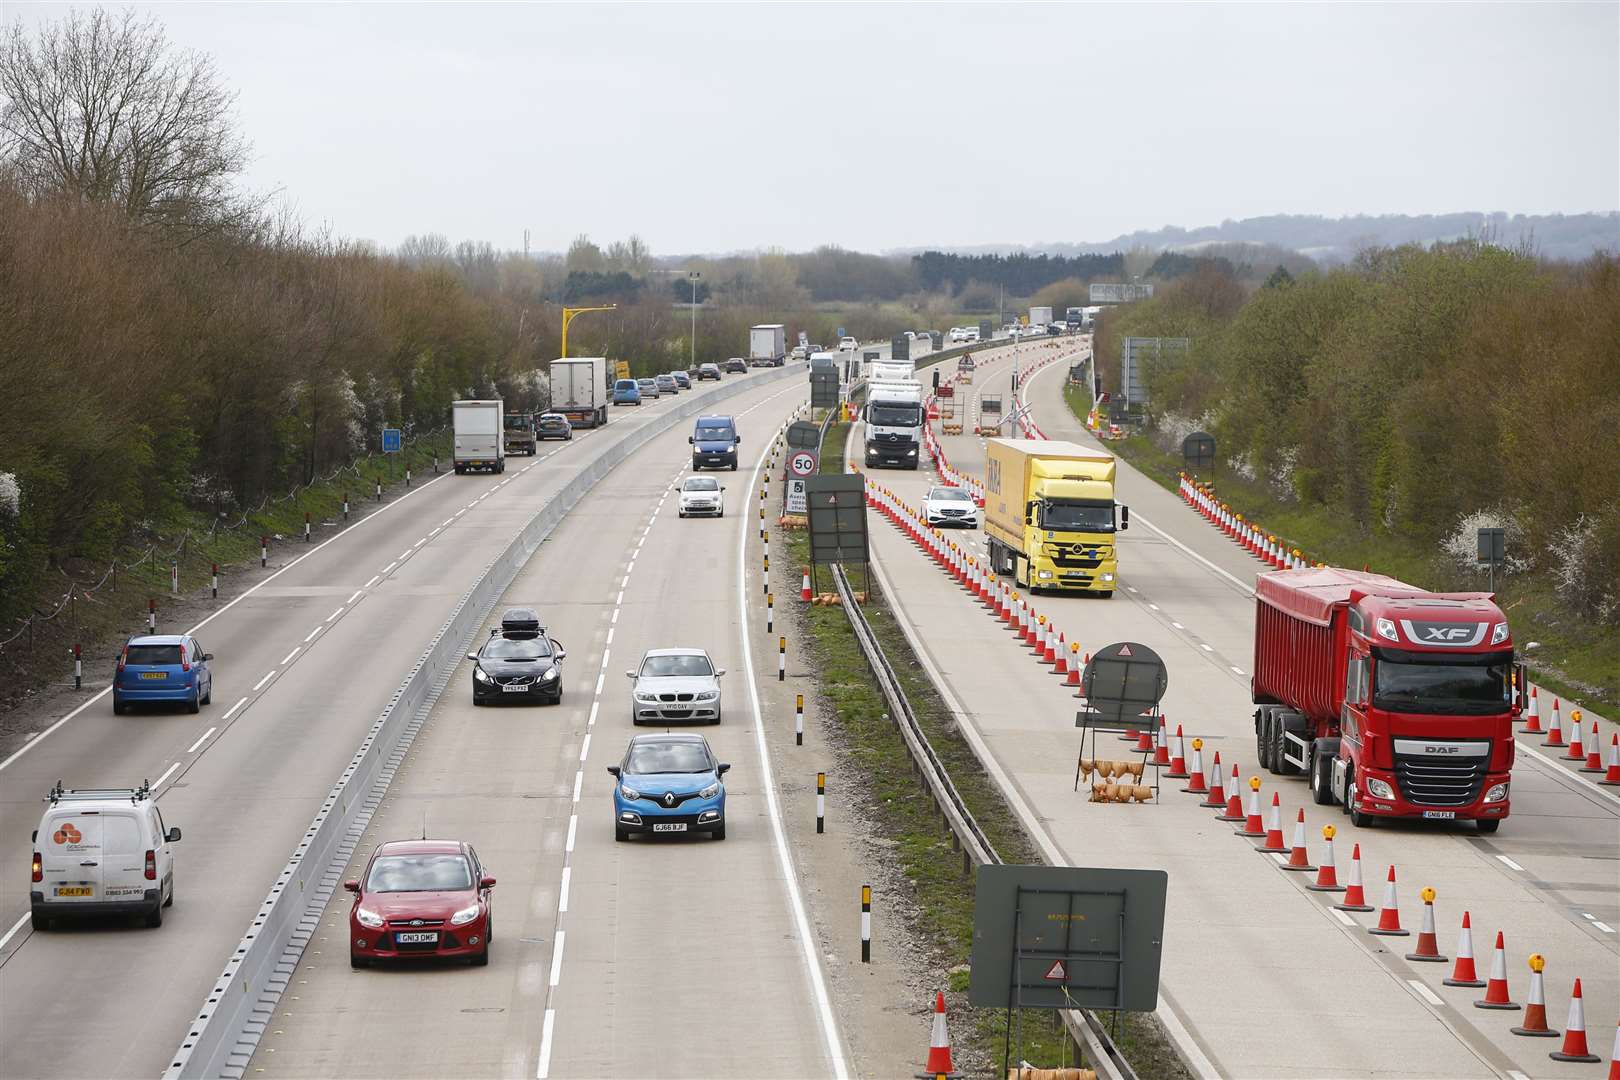 The Operation Brock contraflow on the M20 is to return